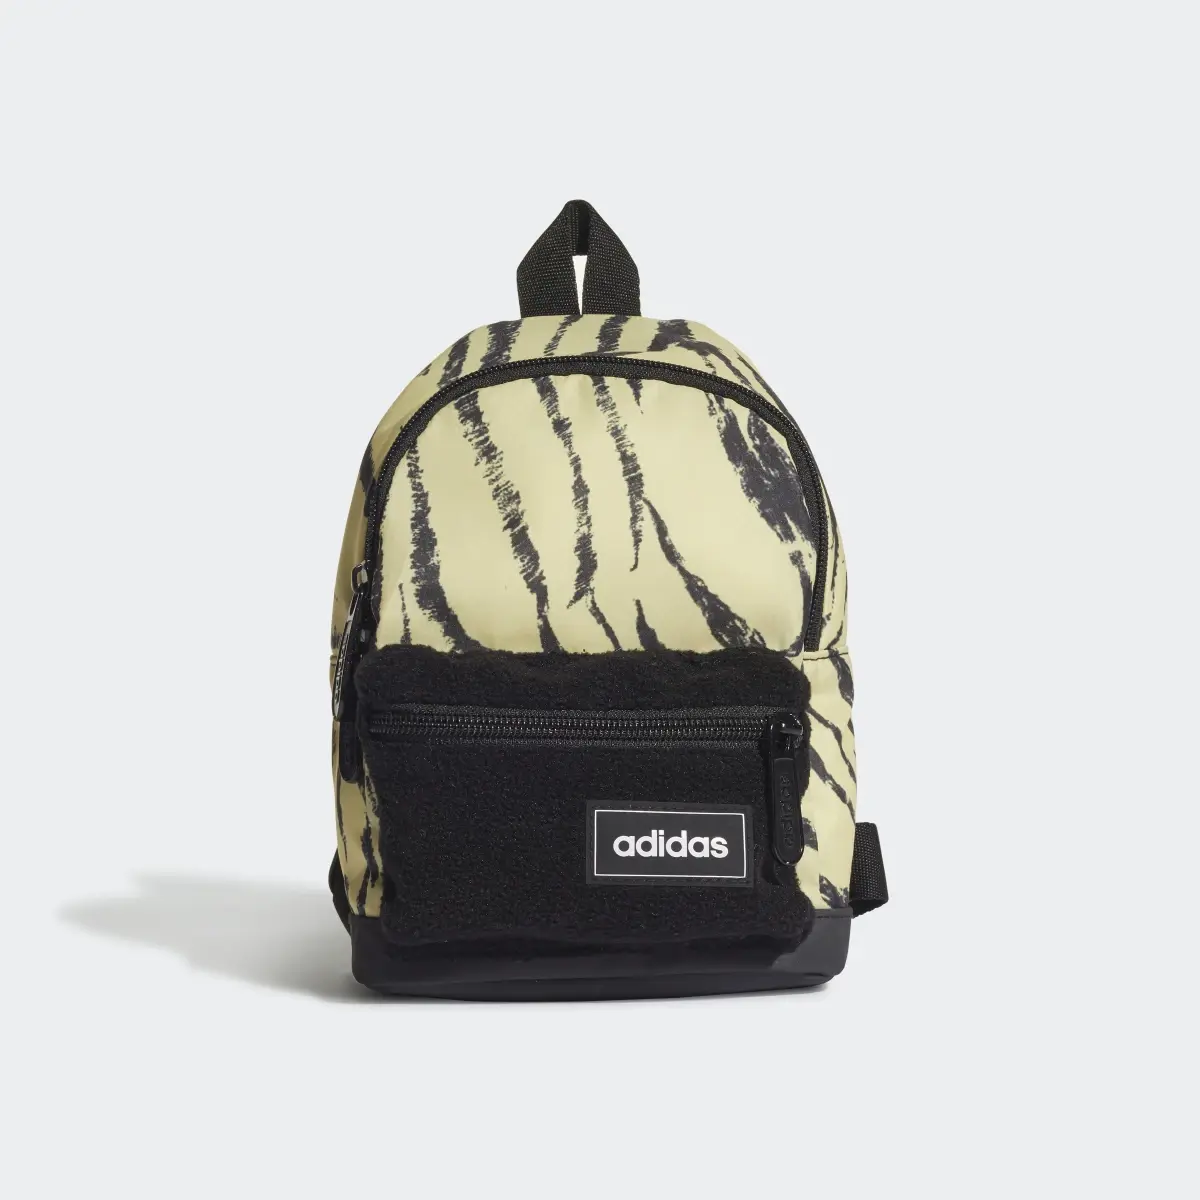 Adidas Tailored for Her Sport to Street Training Mini Backpack. 2